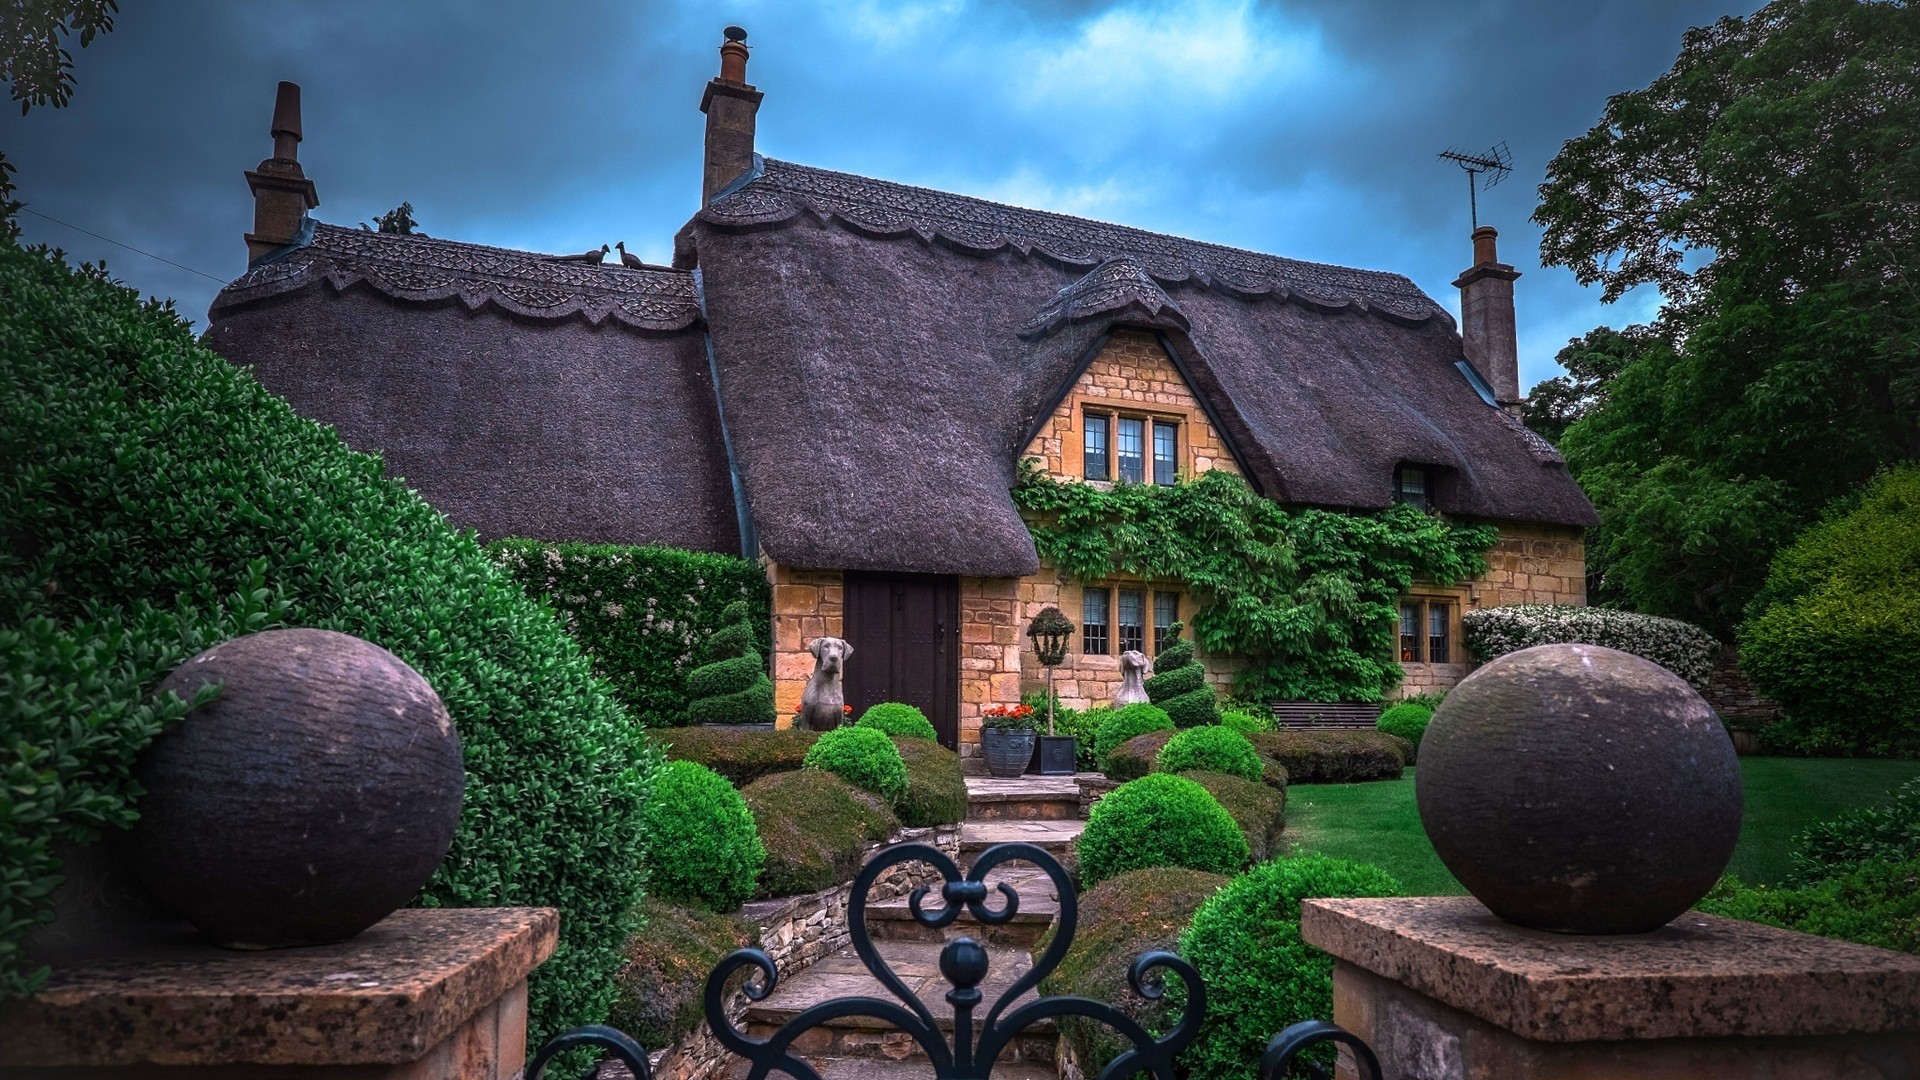 1920x1080 Houses, Cotswold, Cottage, Path, Landscape, Trees, Garden, Architecture,  Lawn, Beautiful, England, Shrubs, Fairy, Tale, Background Wallpaper HD